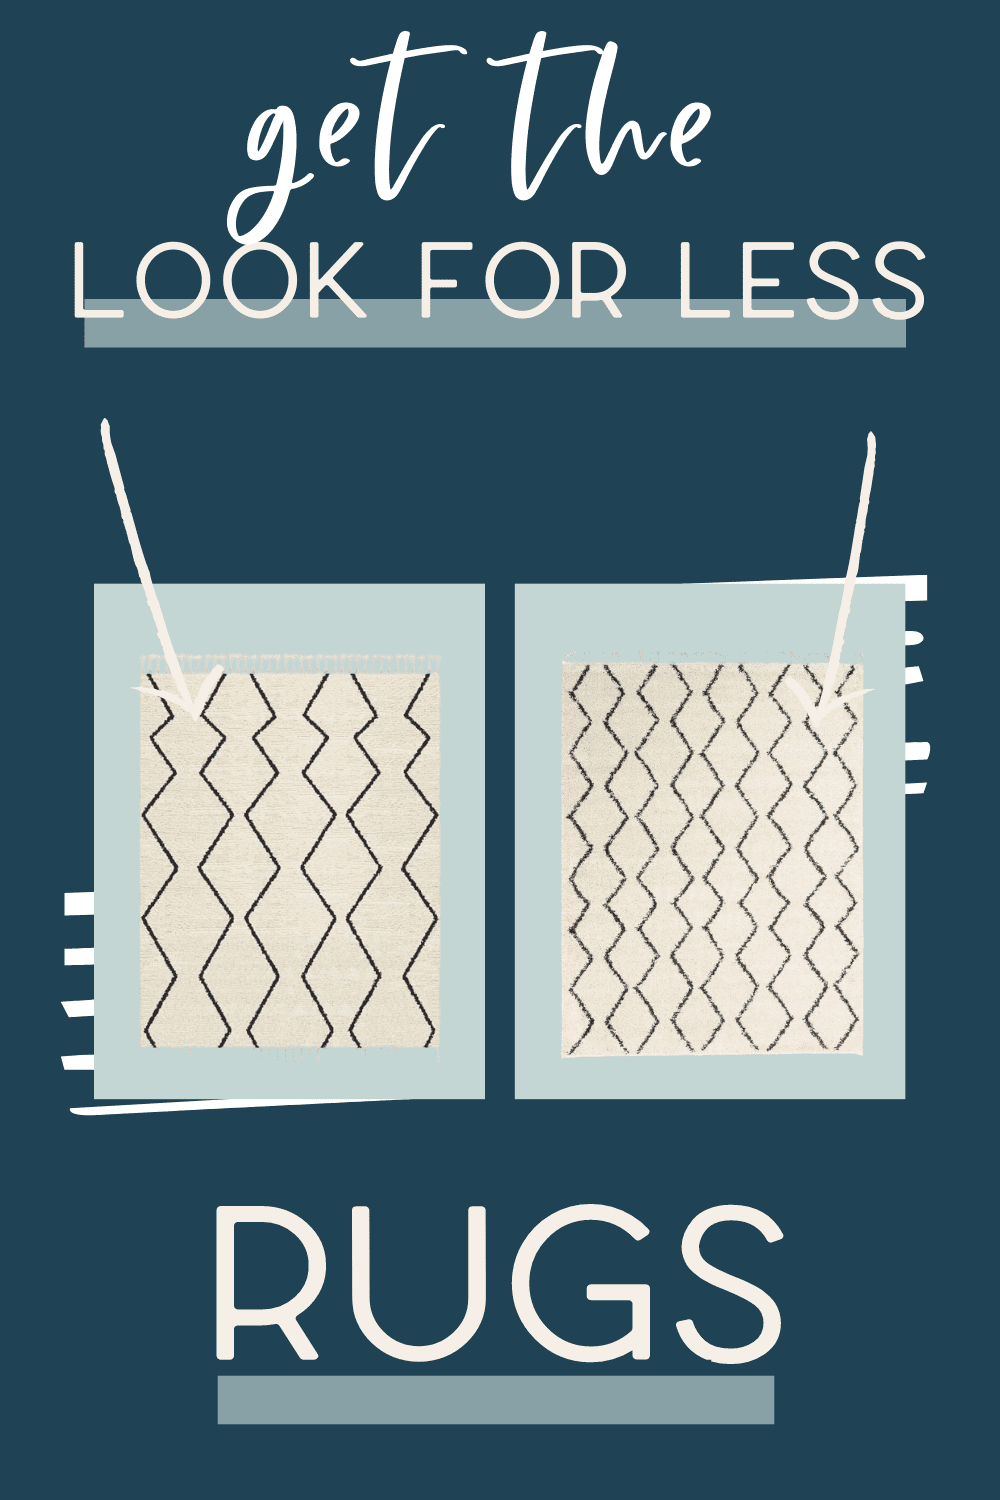 Get The Look For Less – Rugs